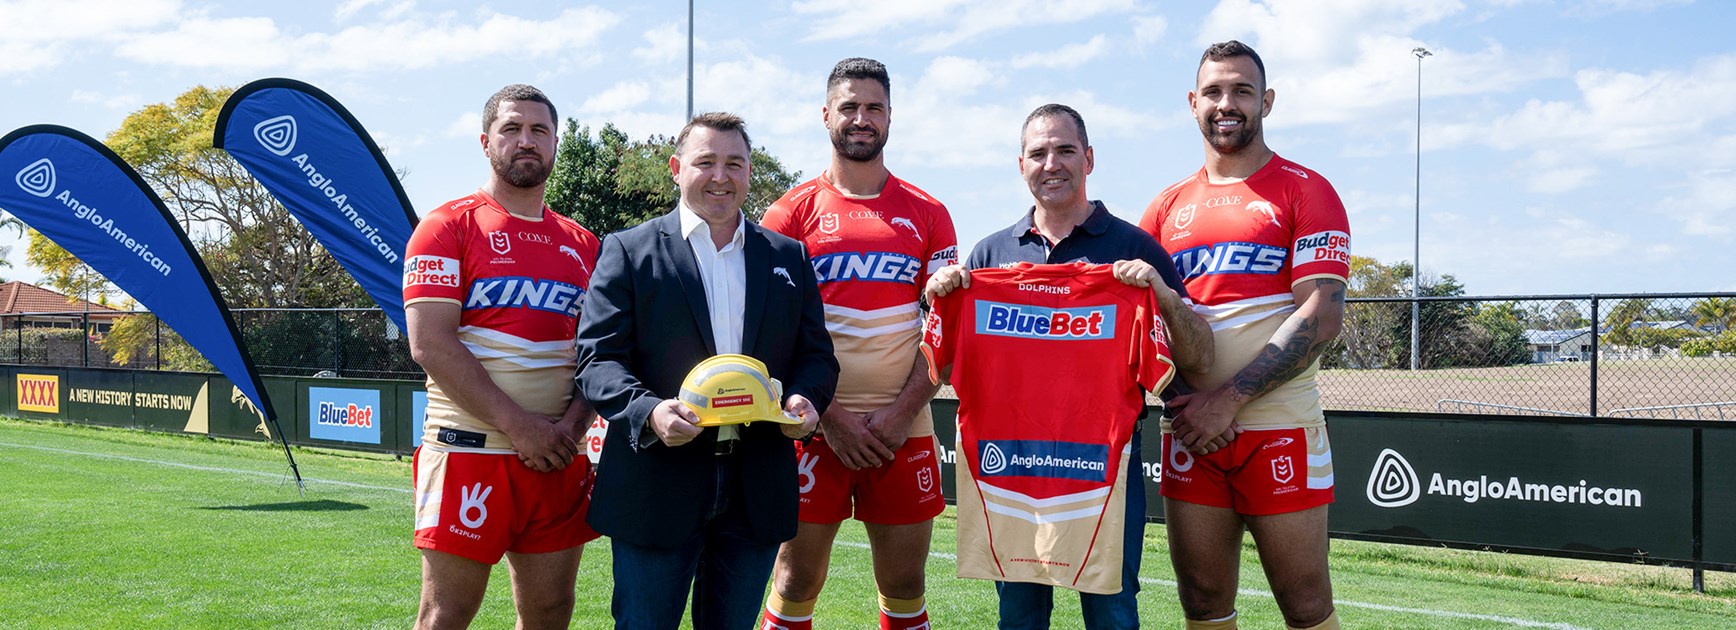 Dolphins welcome Anglo American to the team as Premier Partner